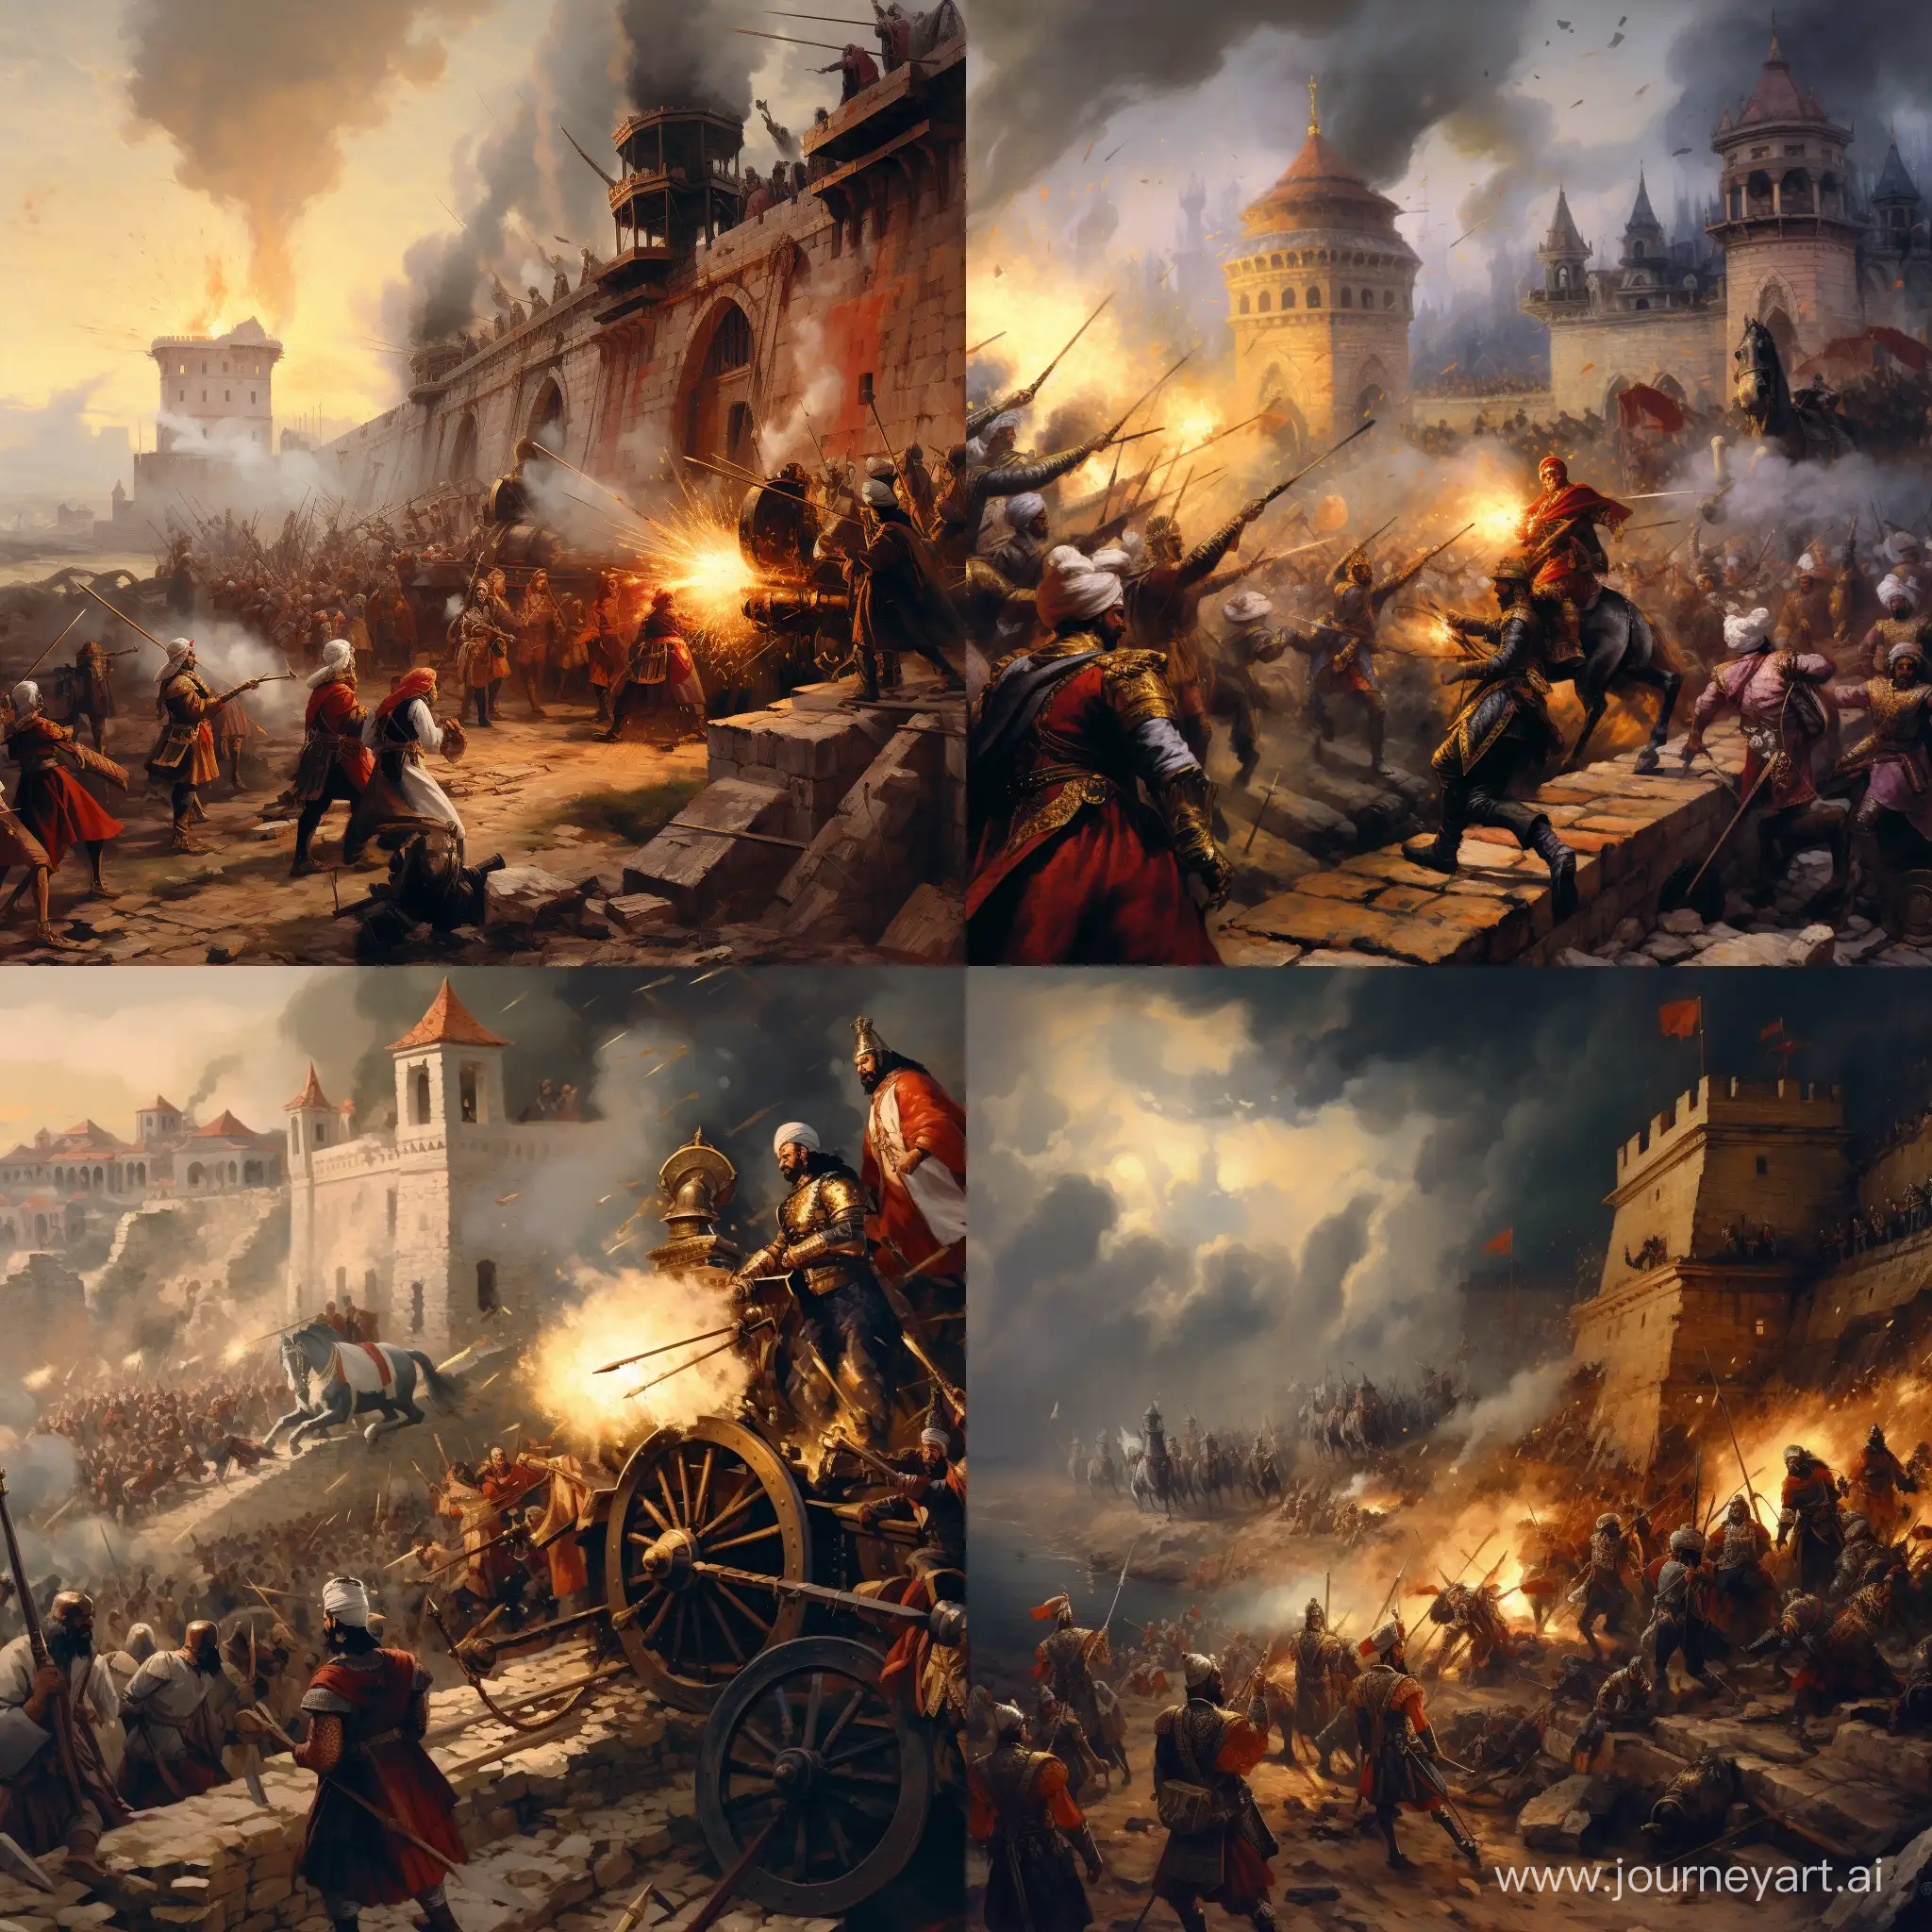 Fatih-Sultan-Mehmet-Khan-Shahi-Destroys-Constantinople-Walls-with-Cannon-Fire